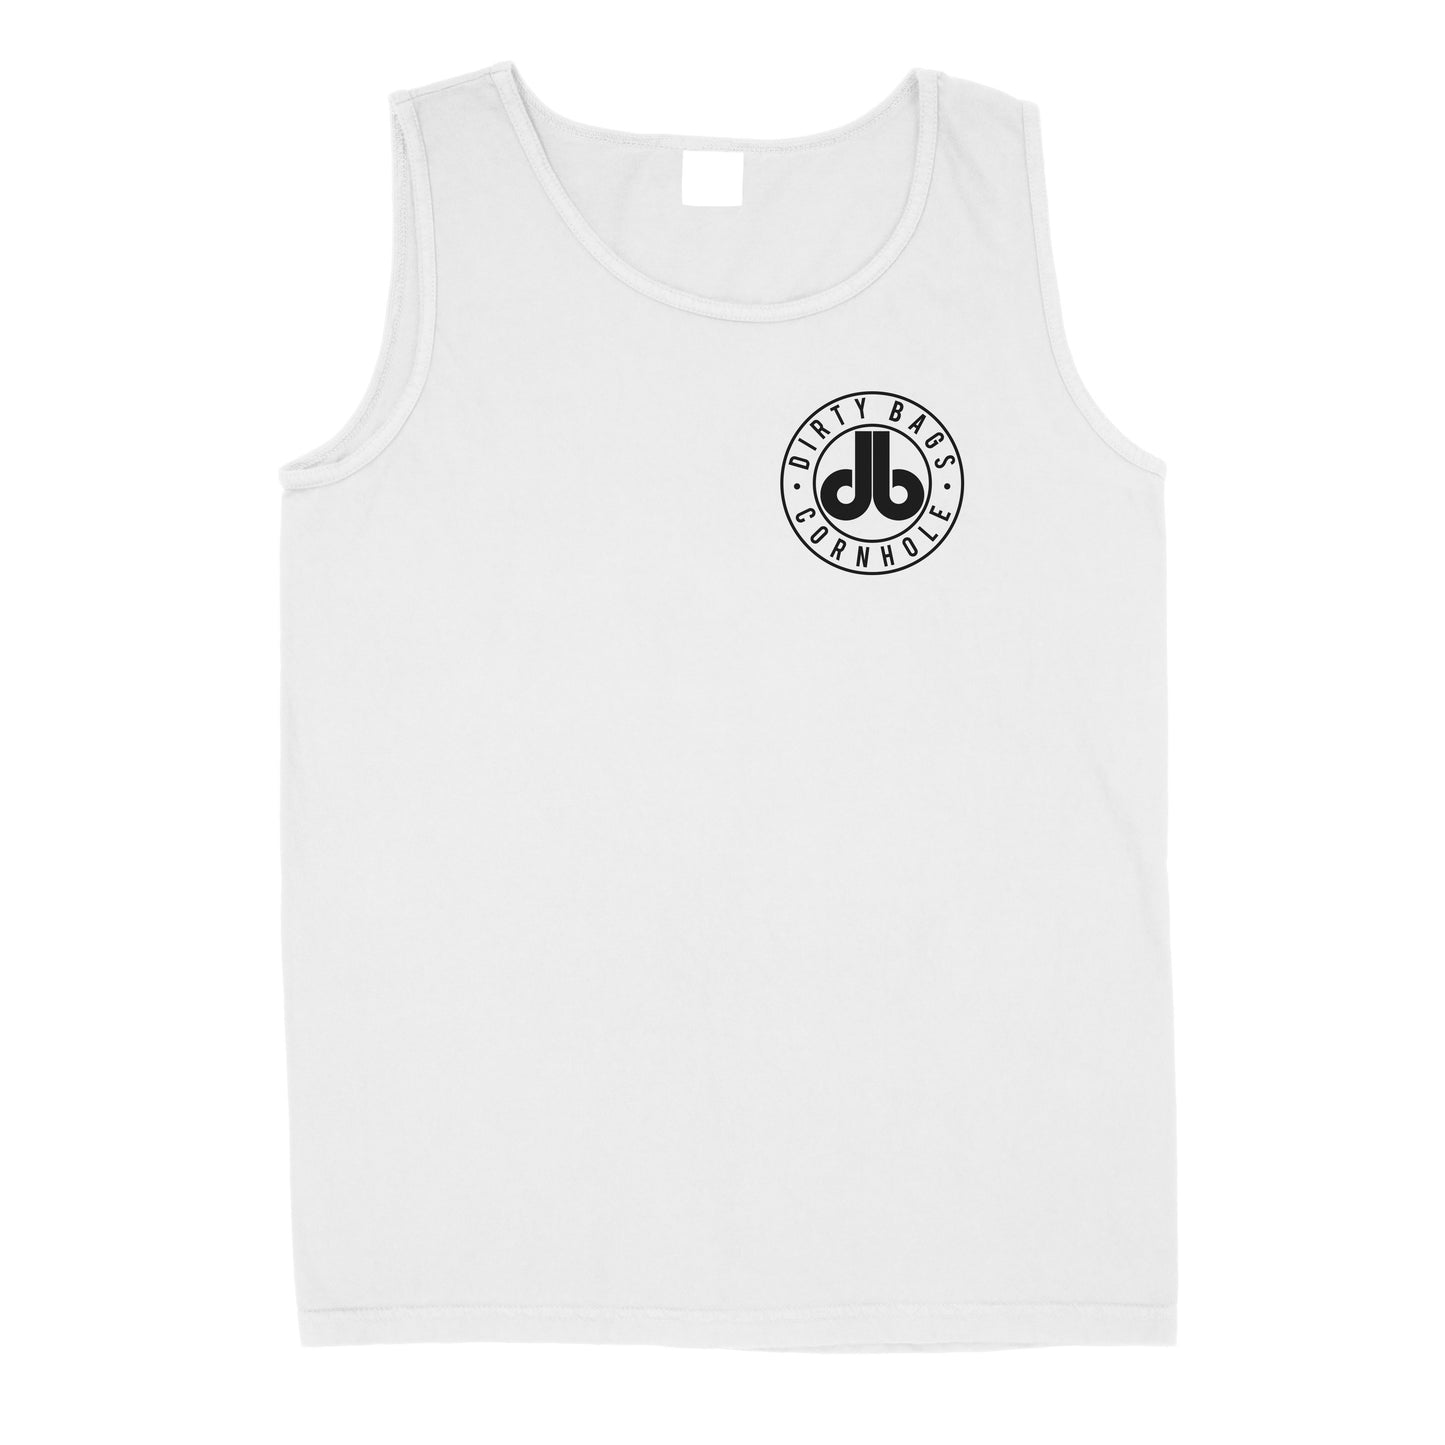 Dirty Bags Mens Tank Top - White with Black Logo